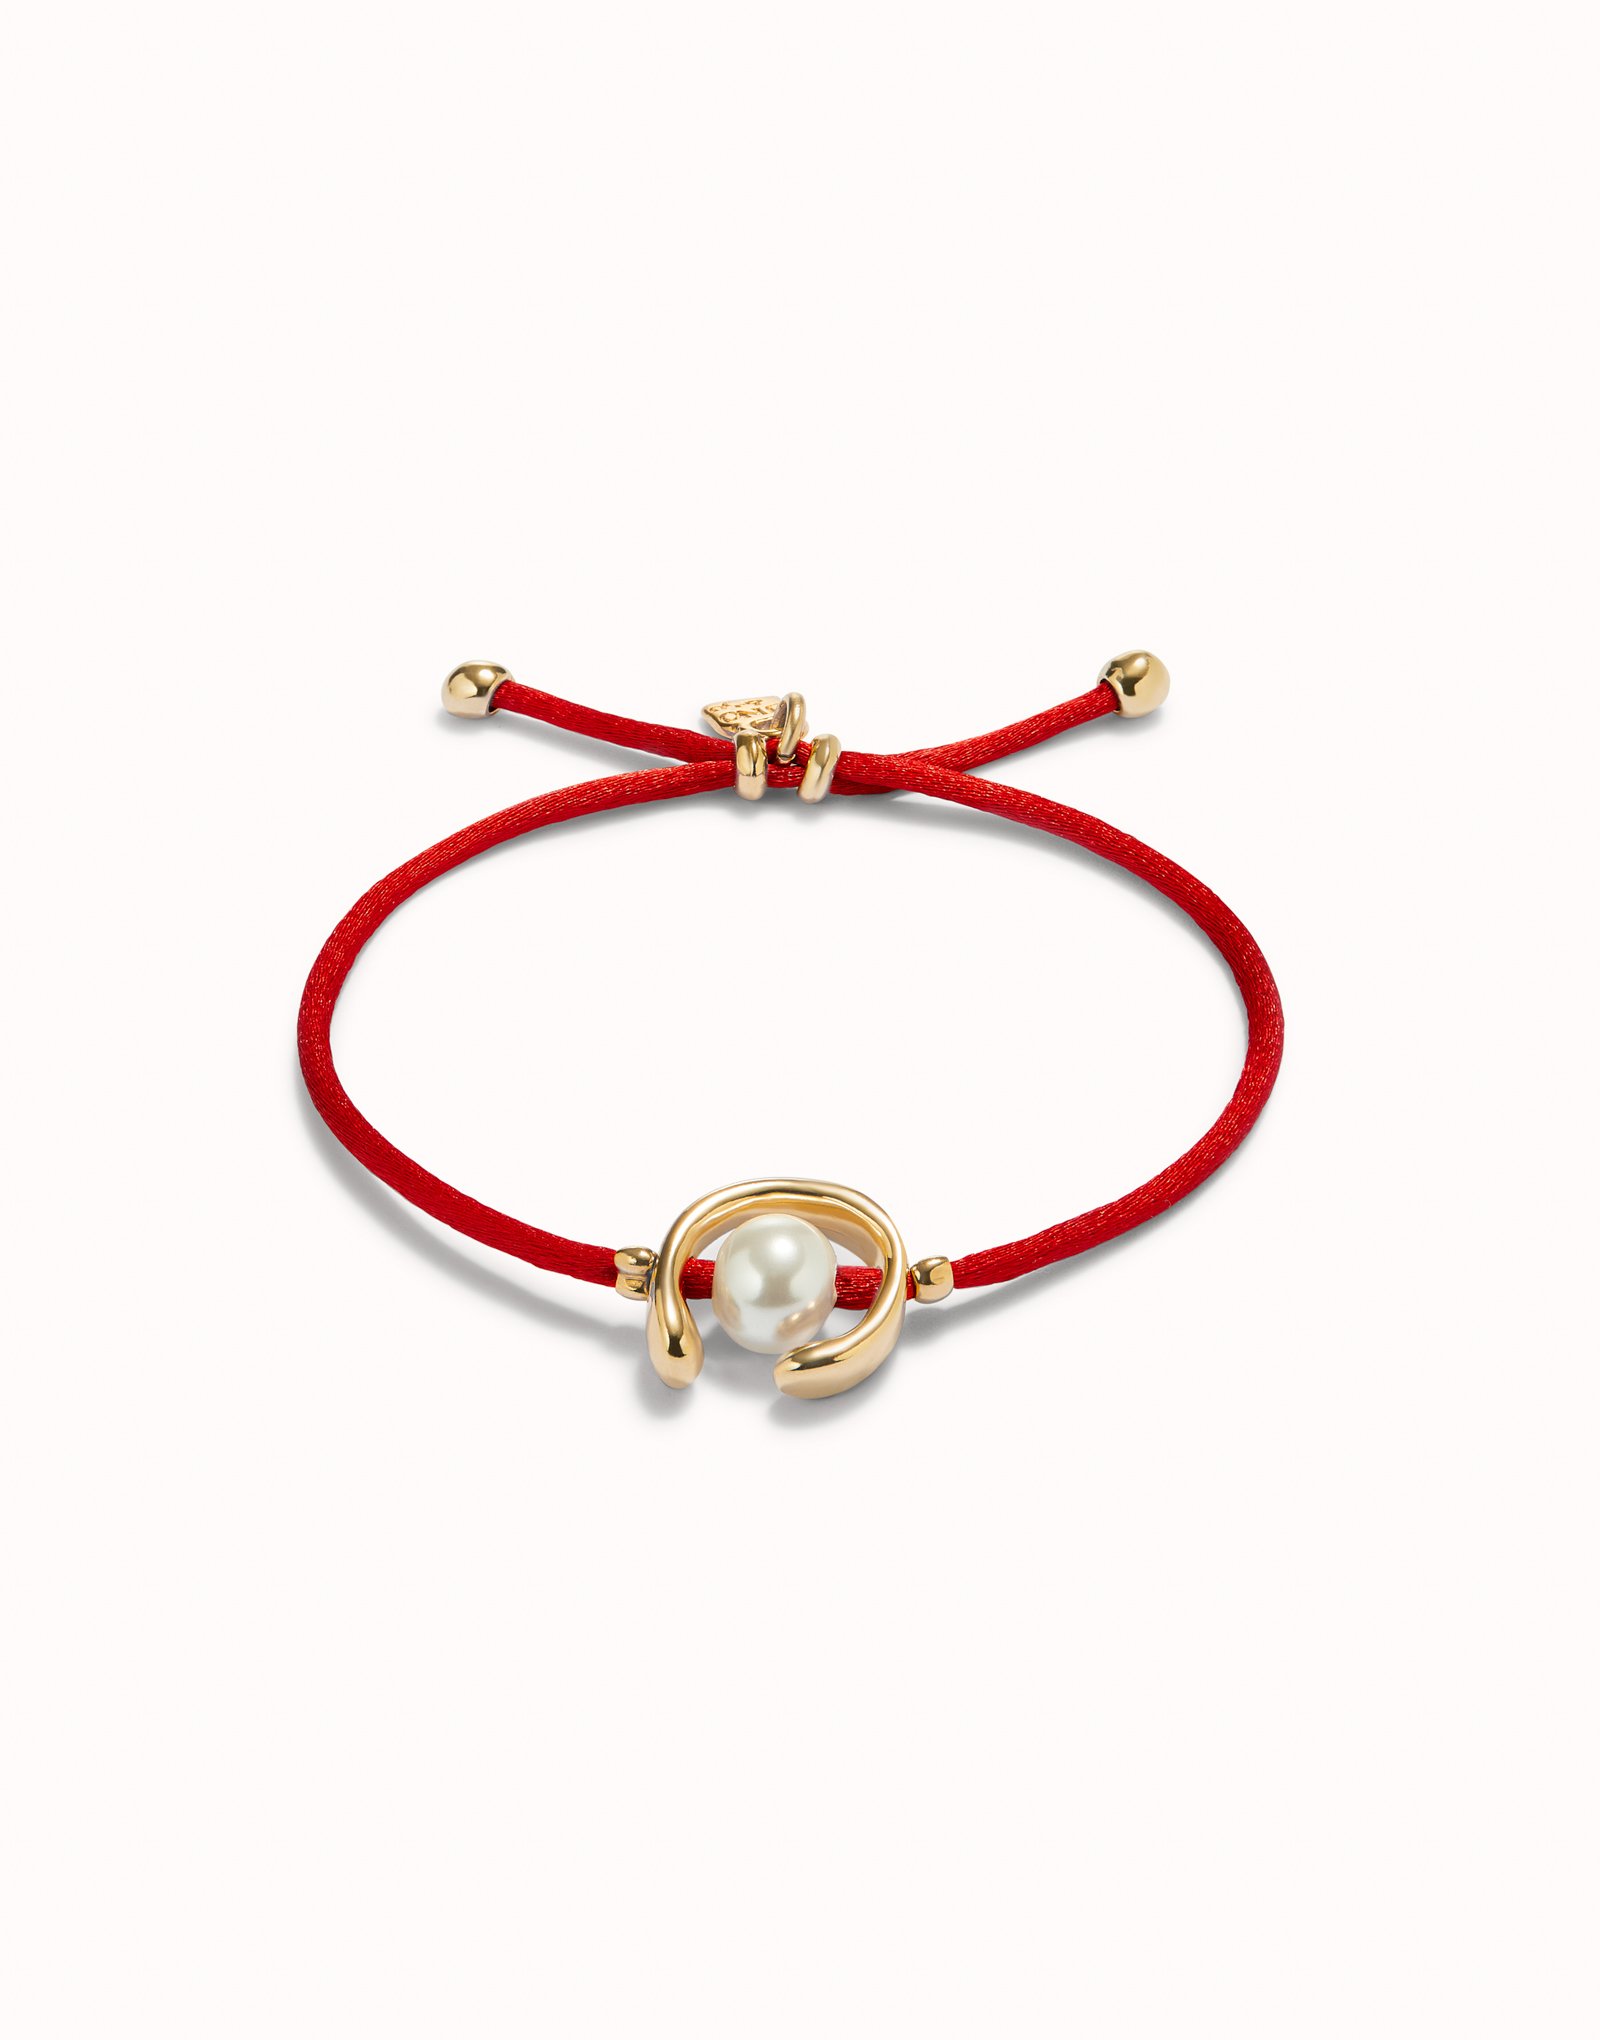 18K gold-plated red thread bracelet with shell pearl accessory., Golden, large image number null